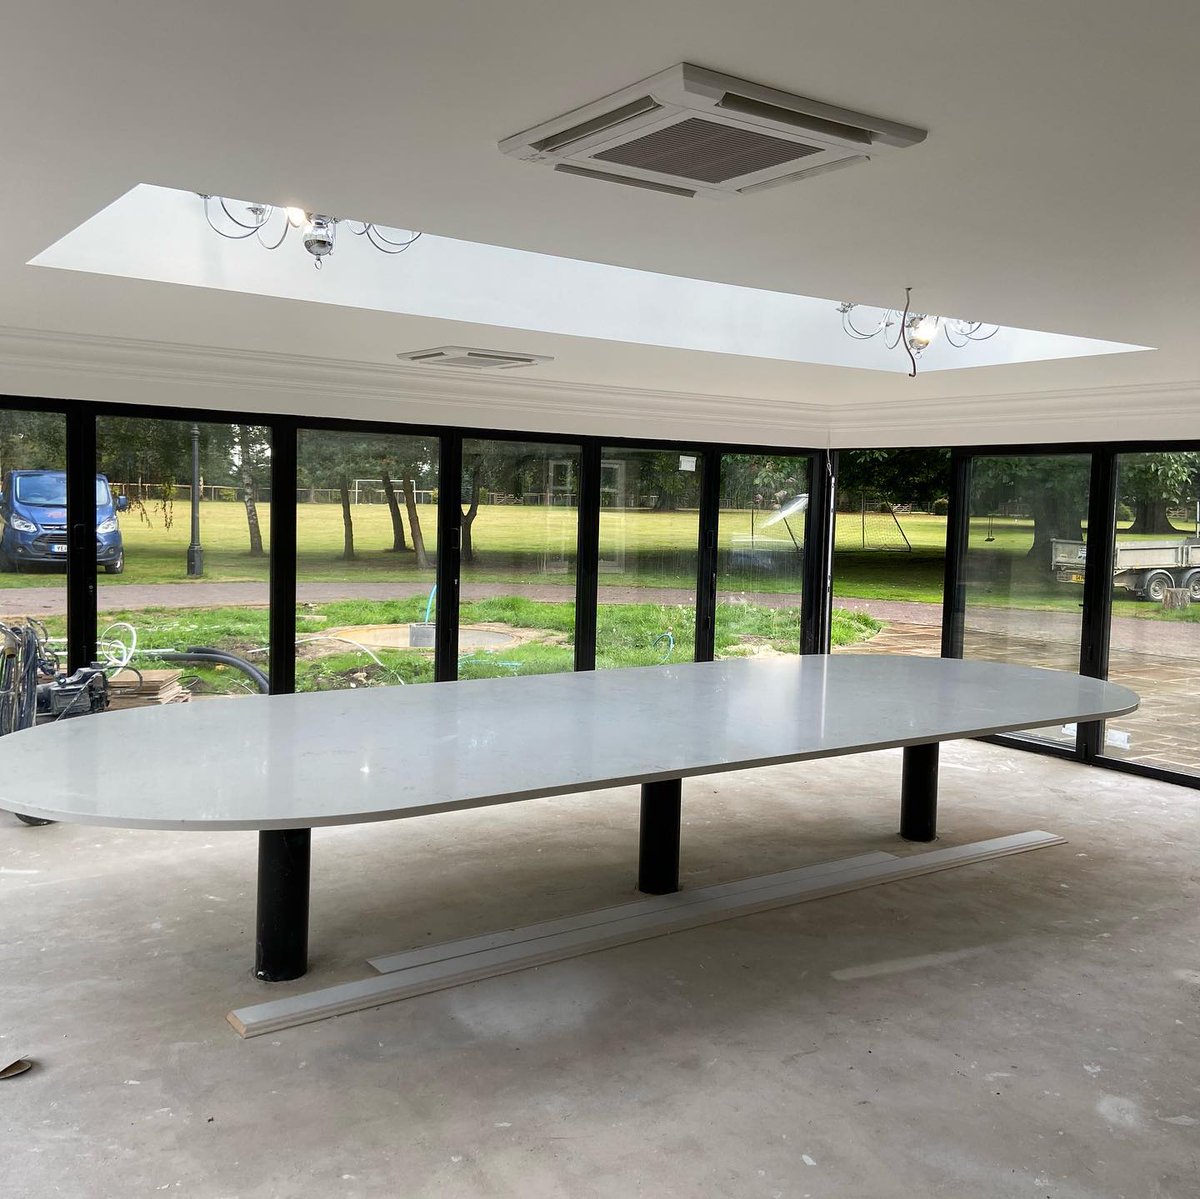 We often get asked to make something unusual, and this dining table certainly fits that category. It measures 5.3m x1.9m in Fugen Super Jumbo Carrara quartz. This room will definitely be doing some grand entertaining. 
marble-granite-quartz.com
#quartzdiningtable #yorkshirequartz